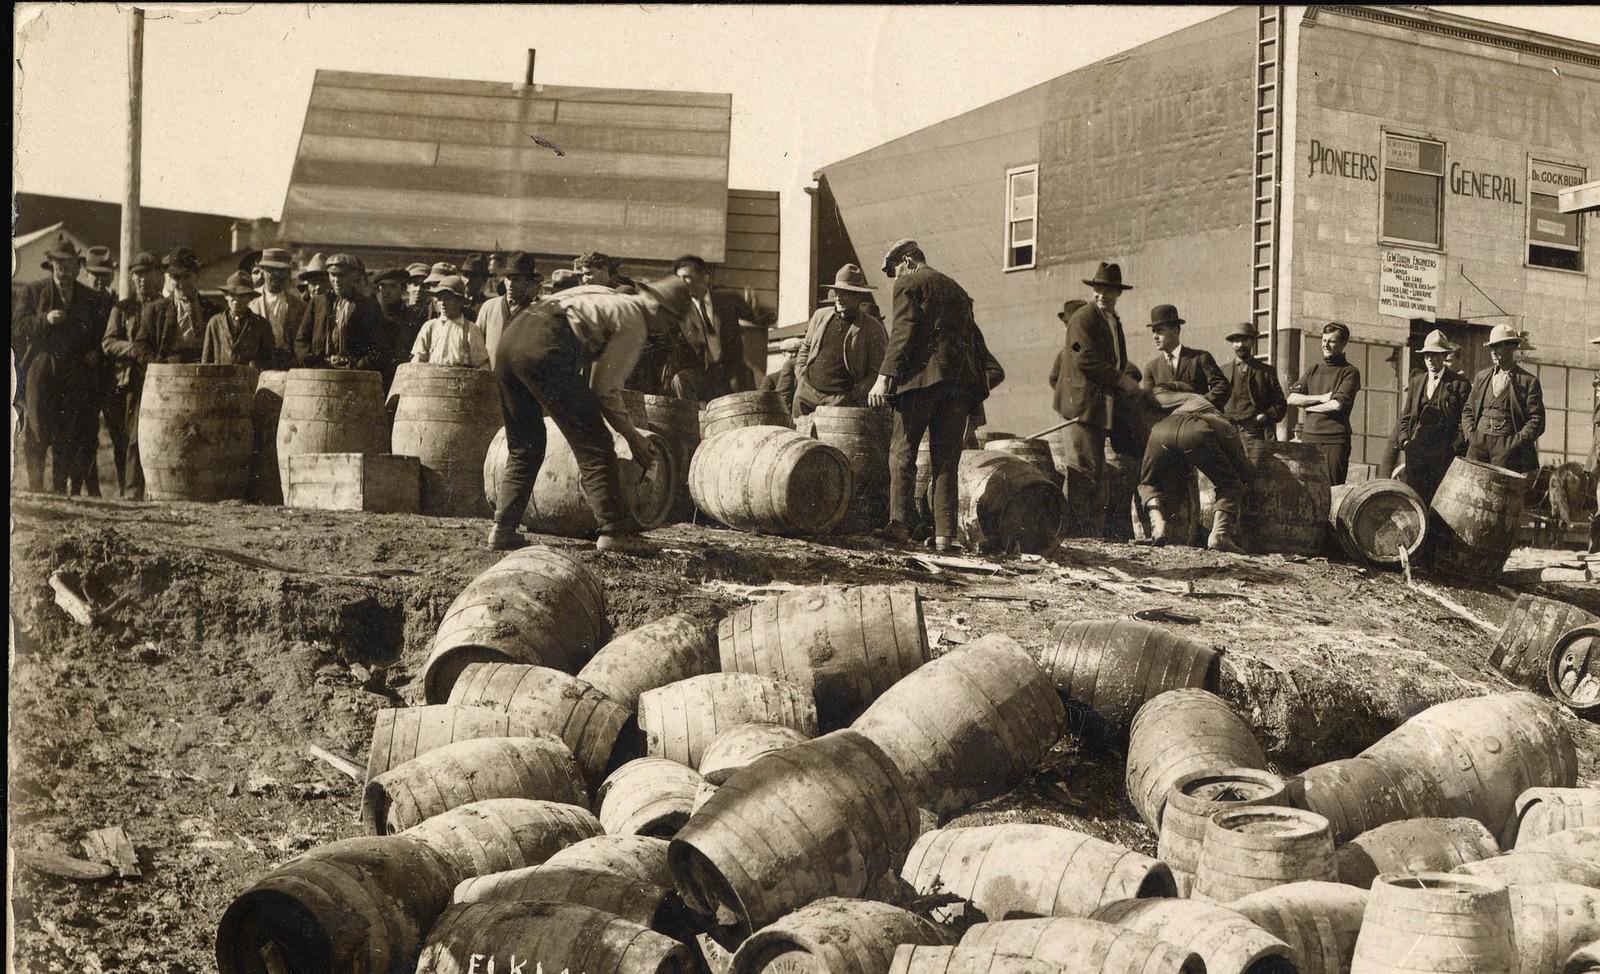 During Prohibition, the US Government may have poisoned up to 10,000 citizens